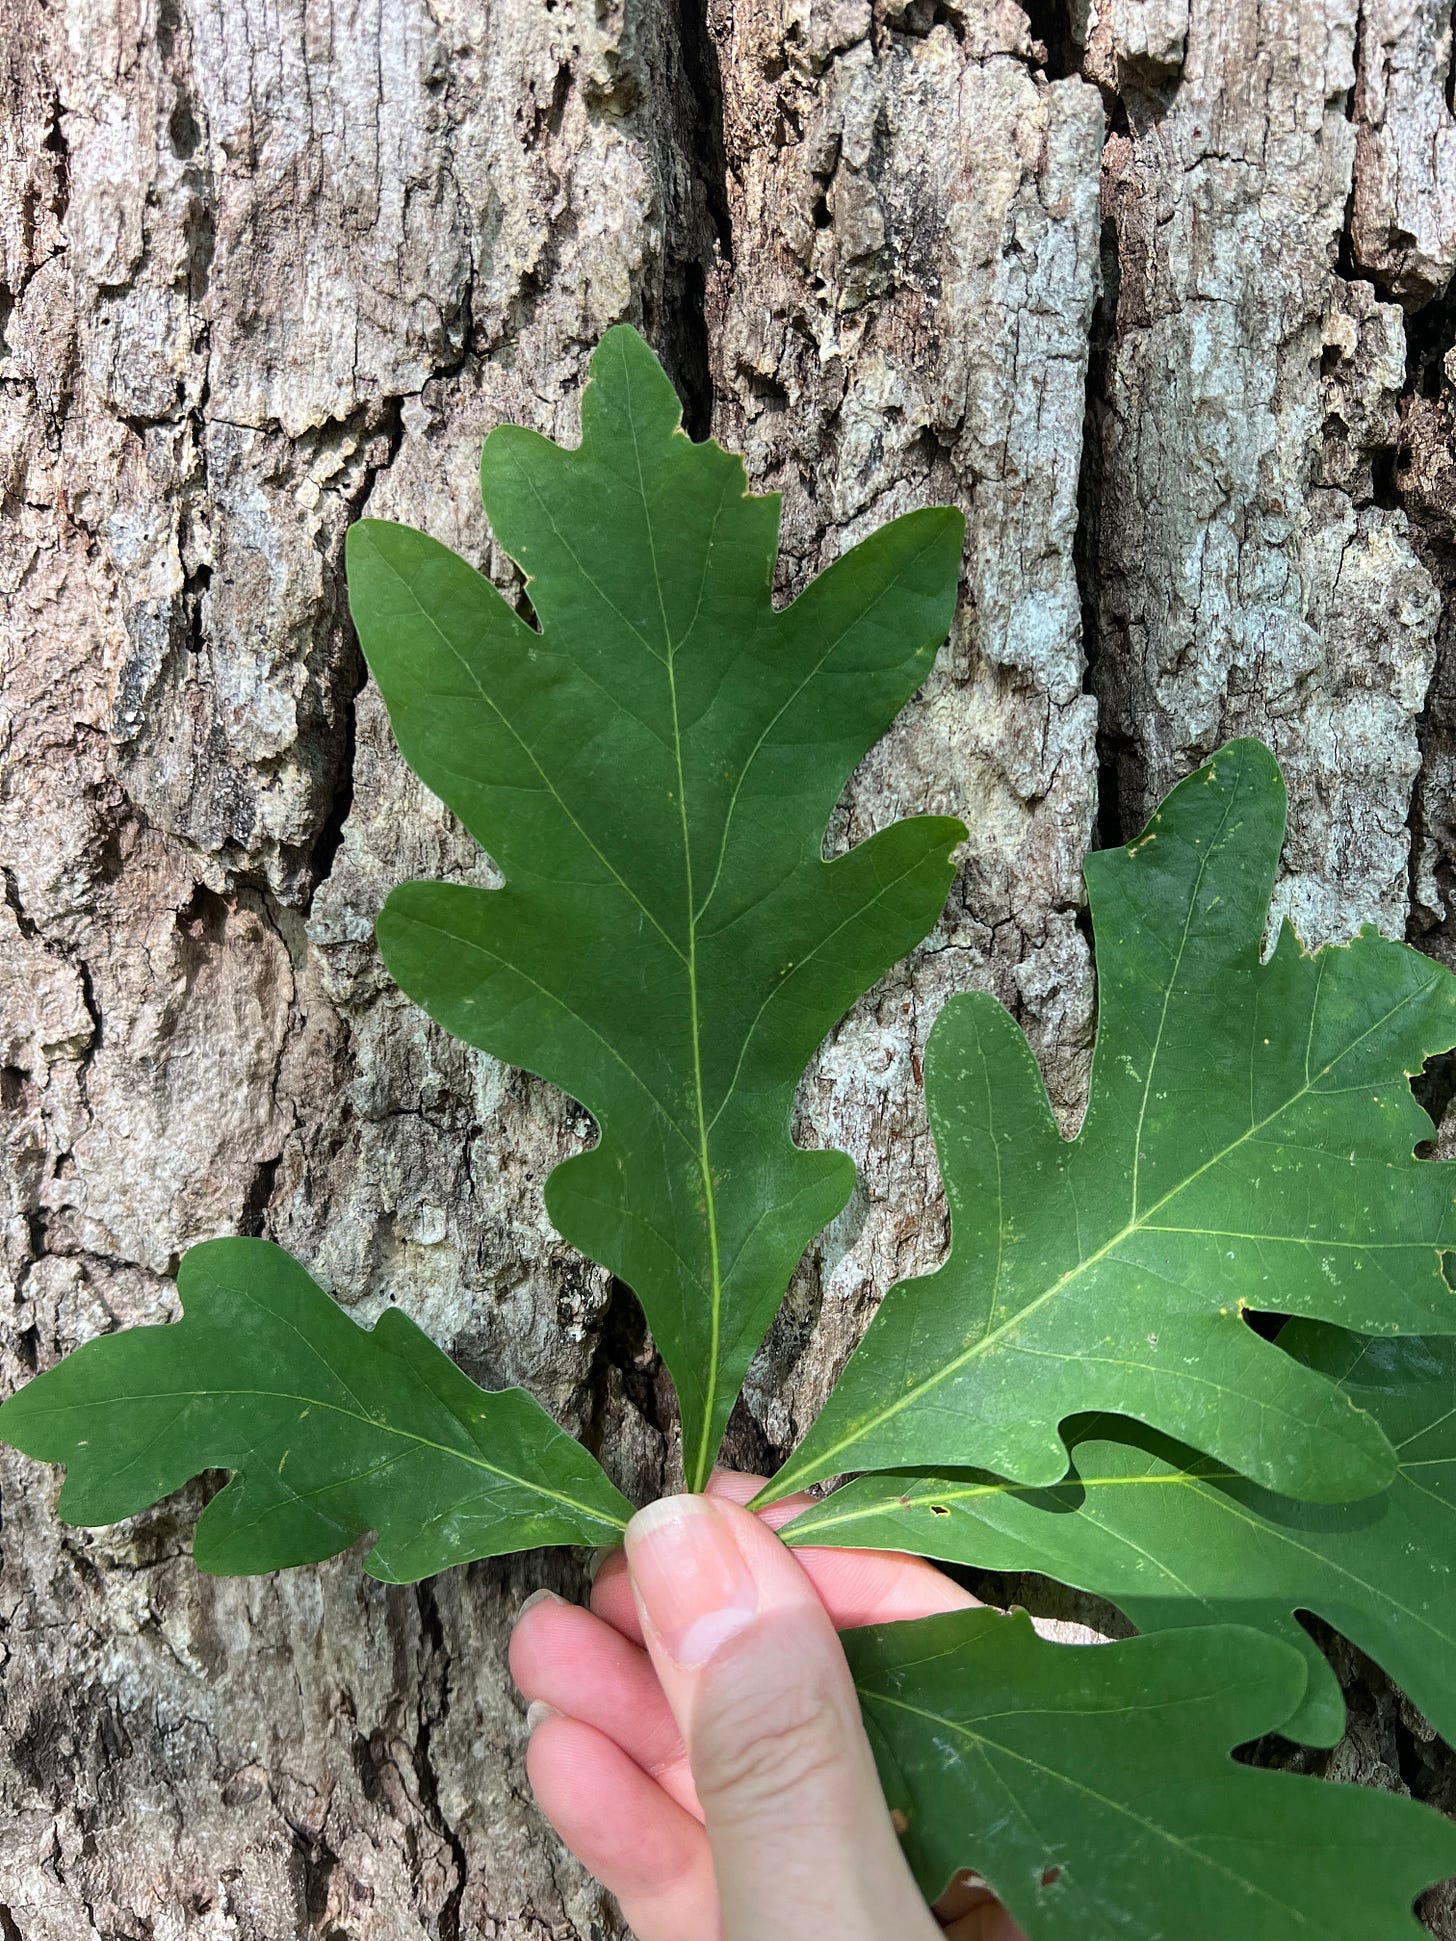 green leaf with rounded lobes against ash-gray bark, 